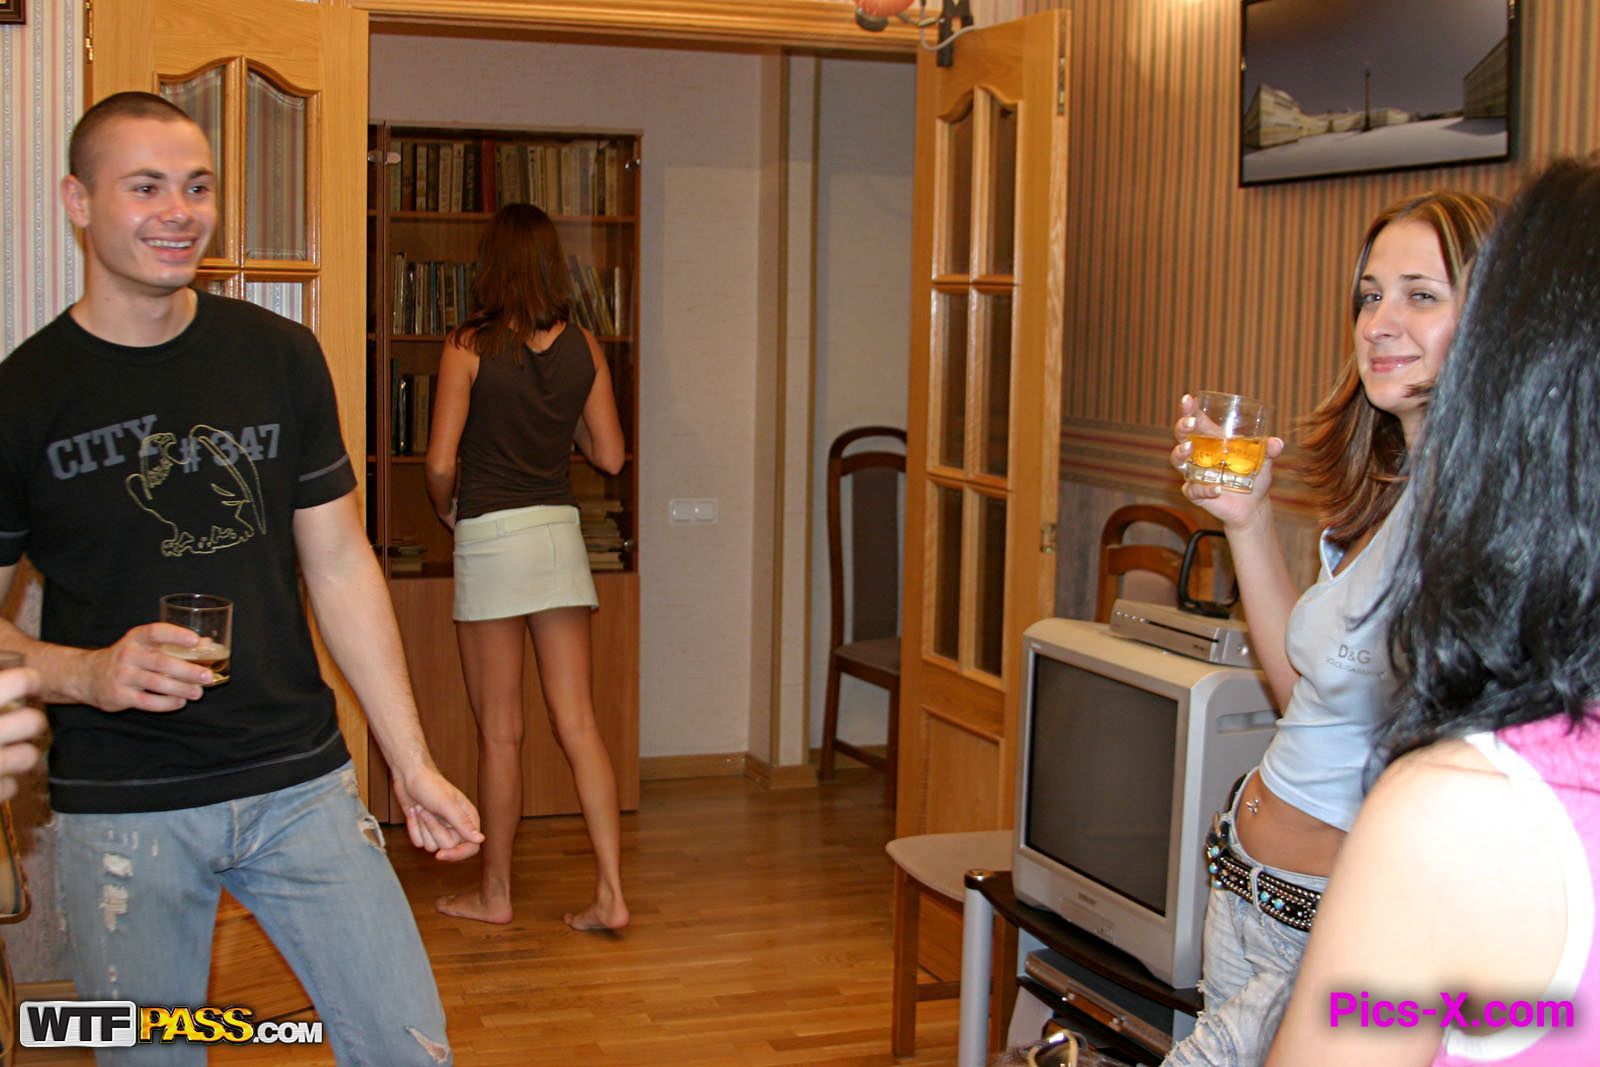 Student sex scenes at weekend bash, part 3 - College Fuck Parties - Image 26